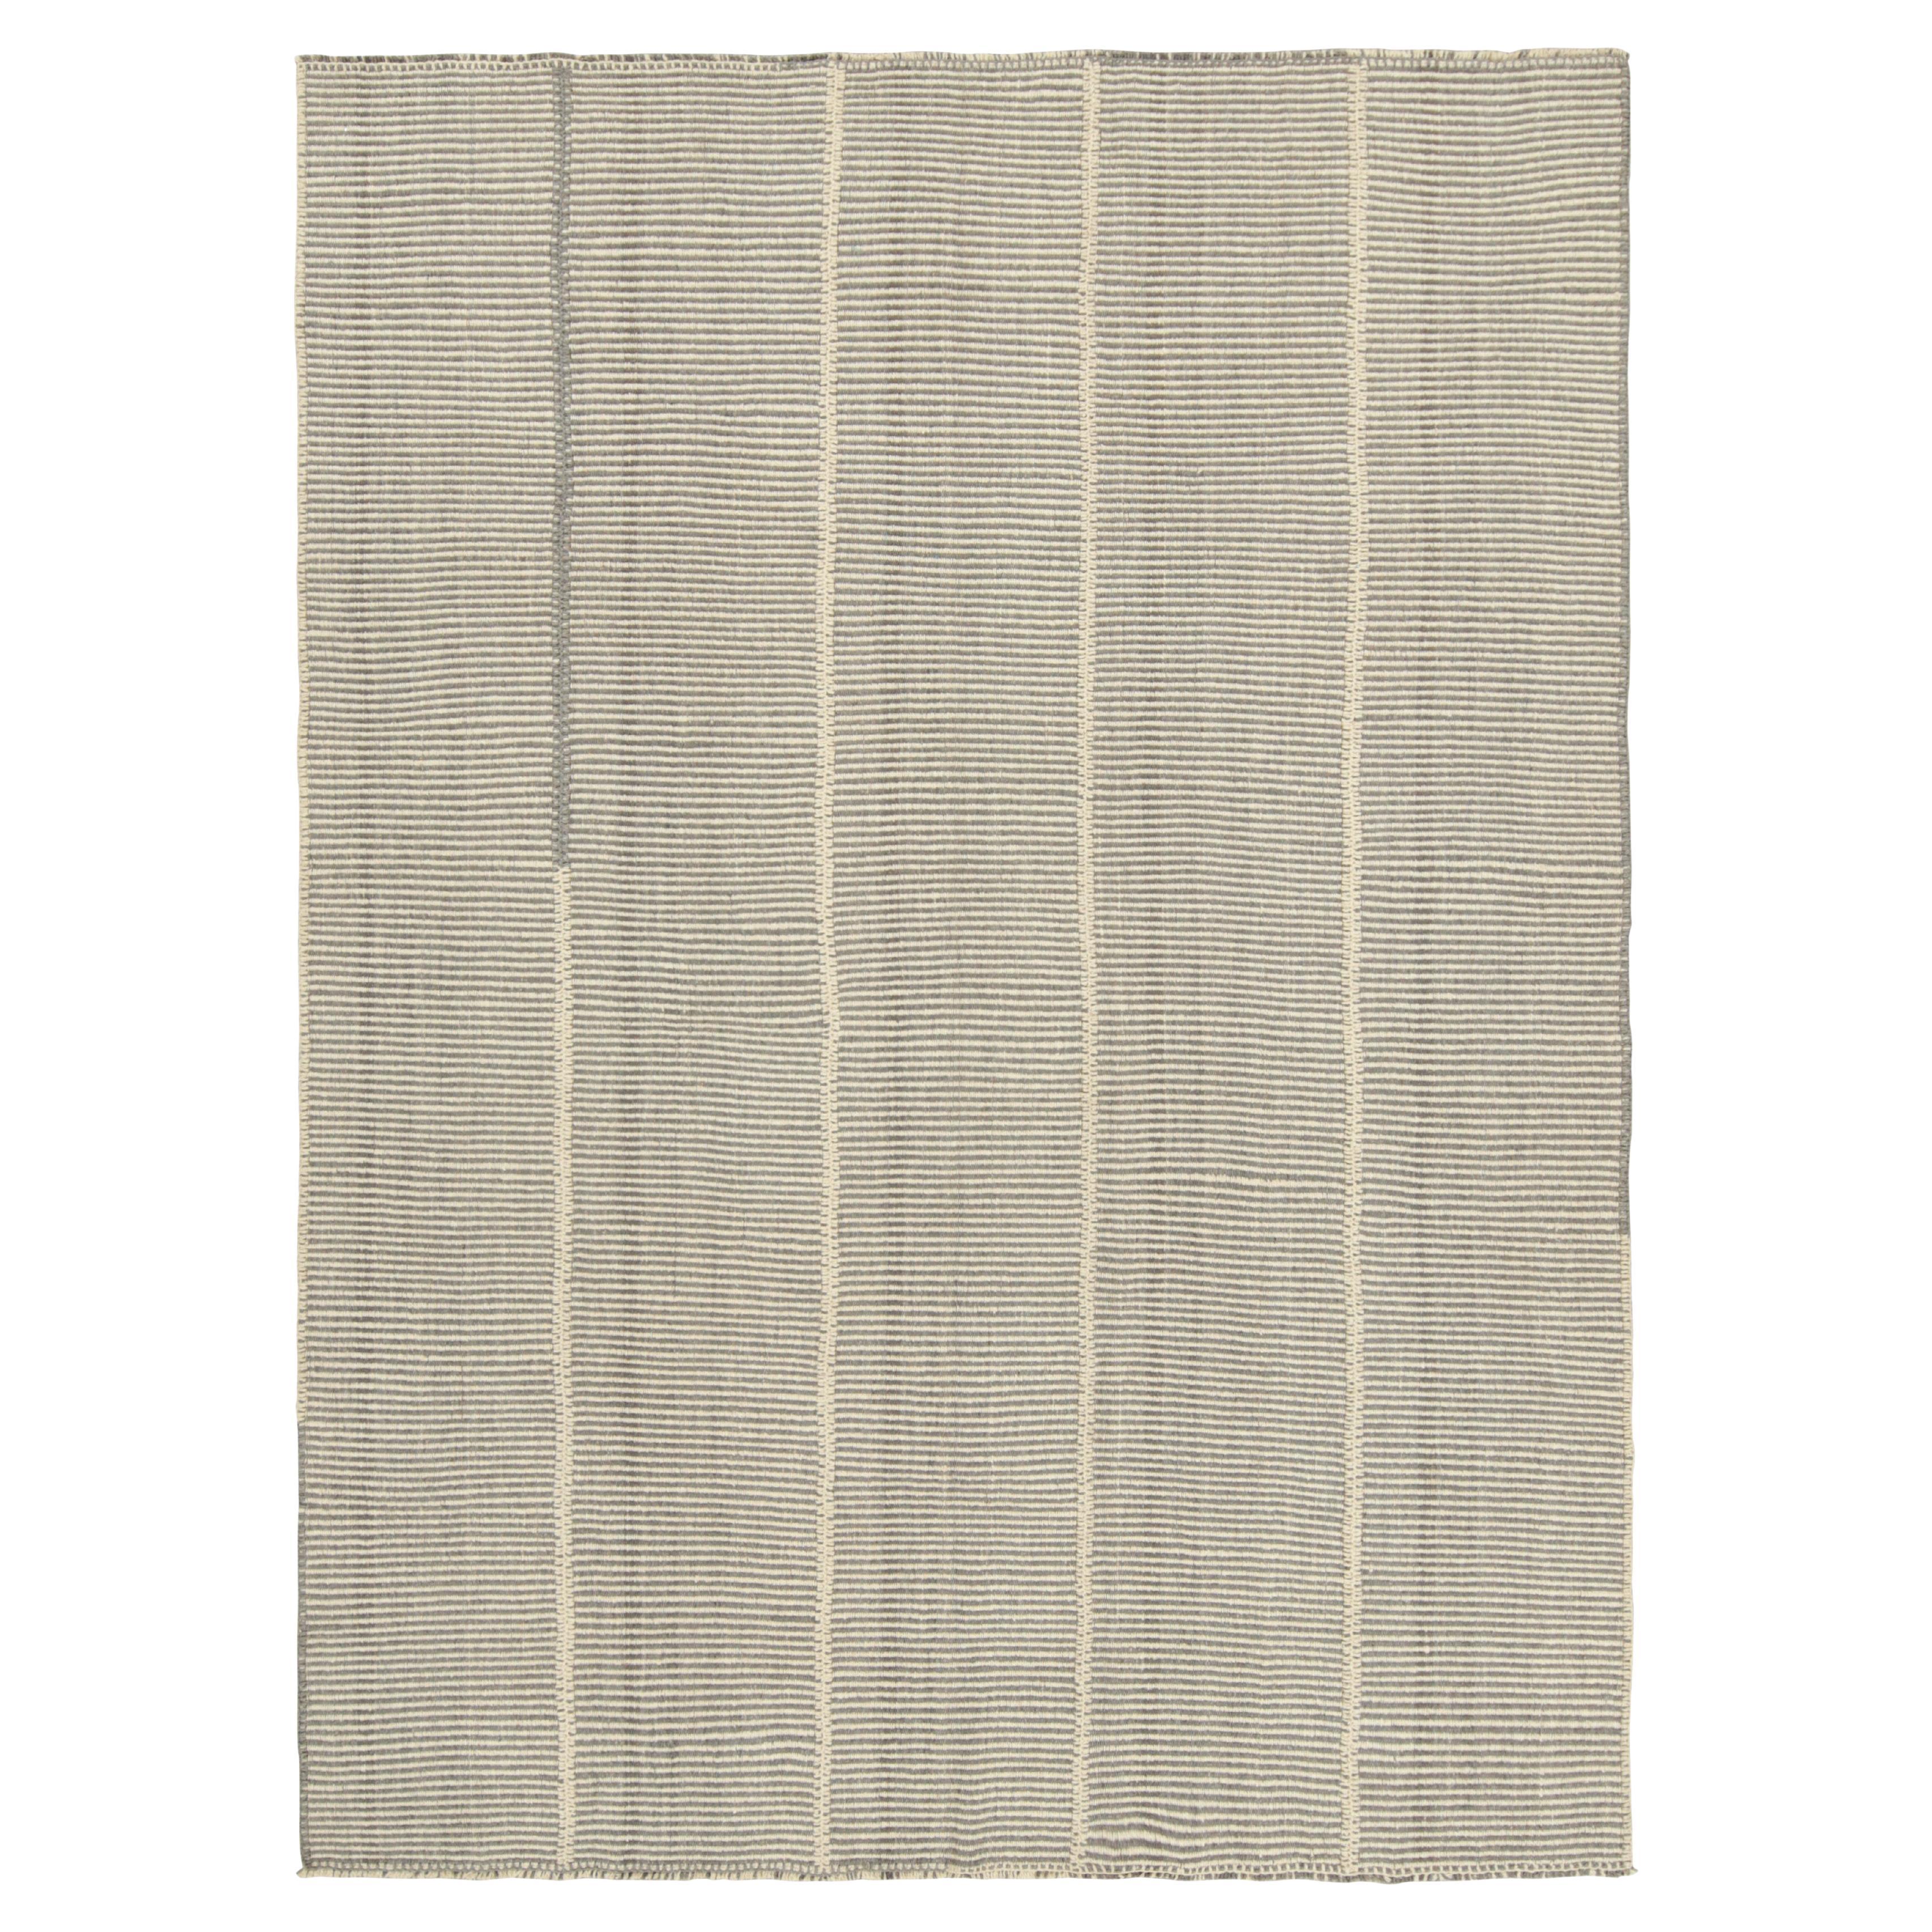 Rug & Kilim’s Contemporary Kilim with Gray and White Textural Stripes